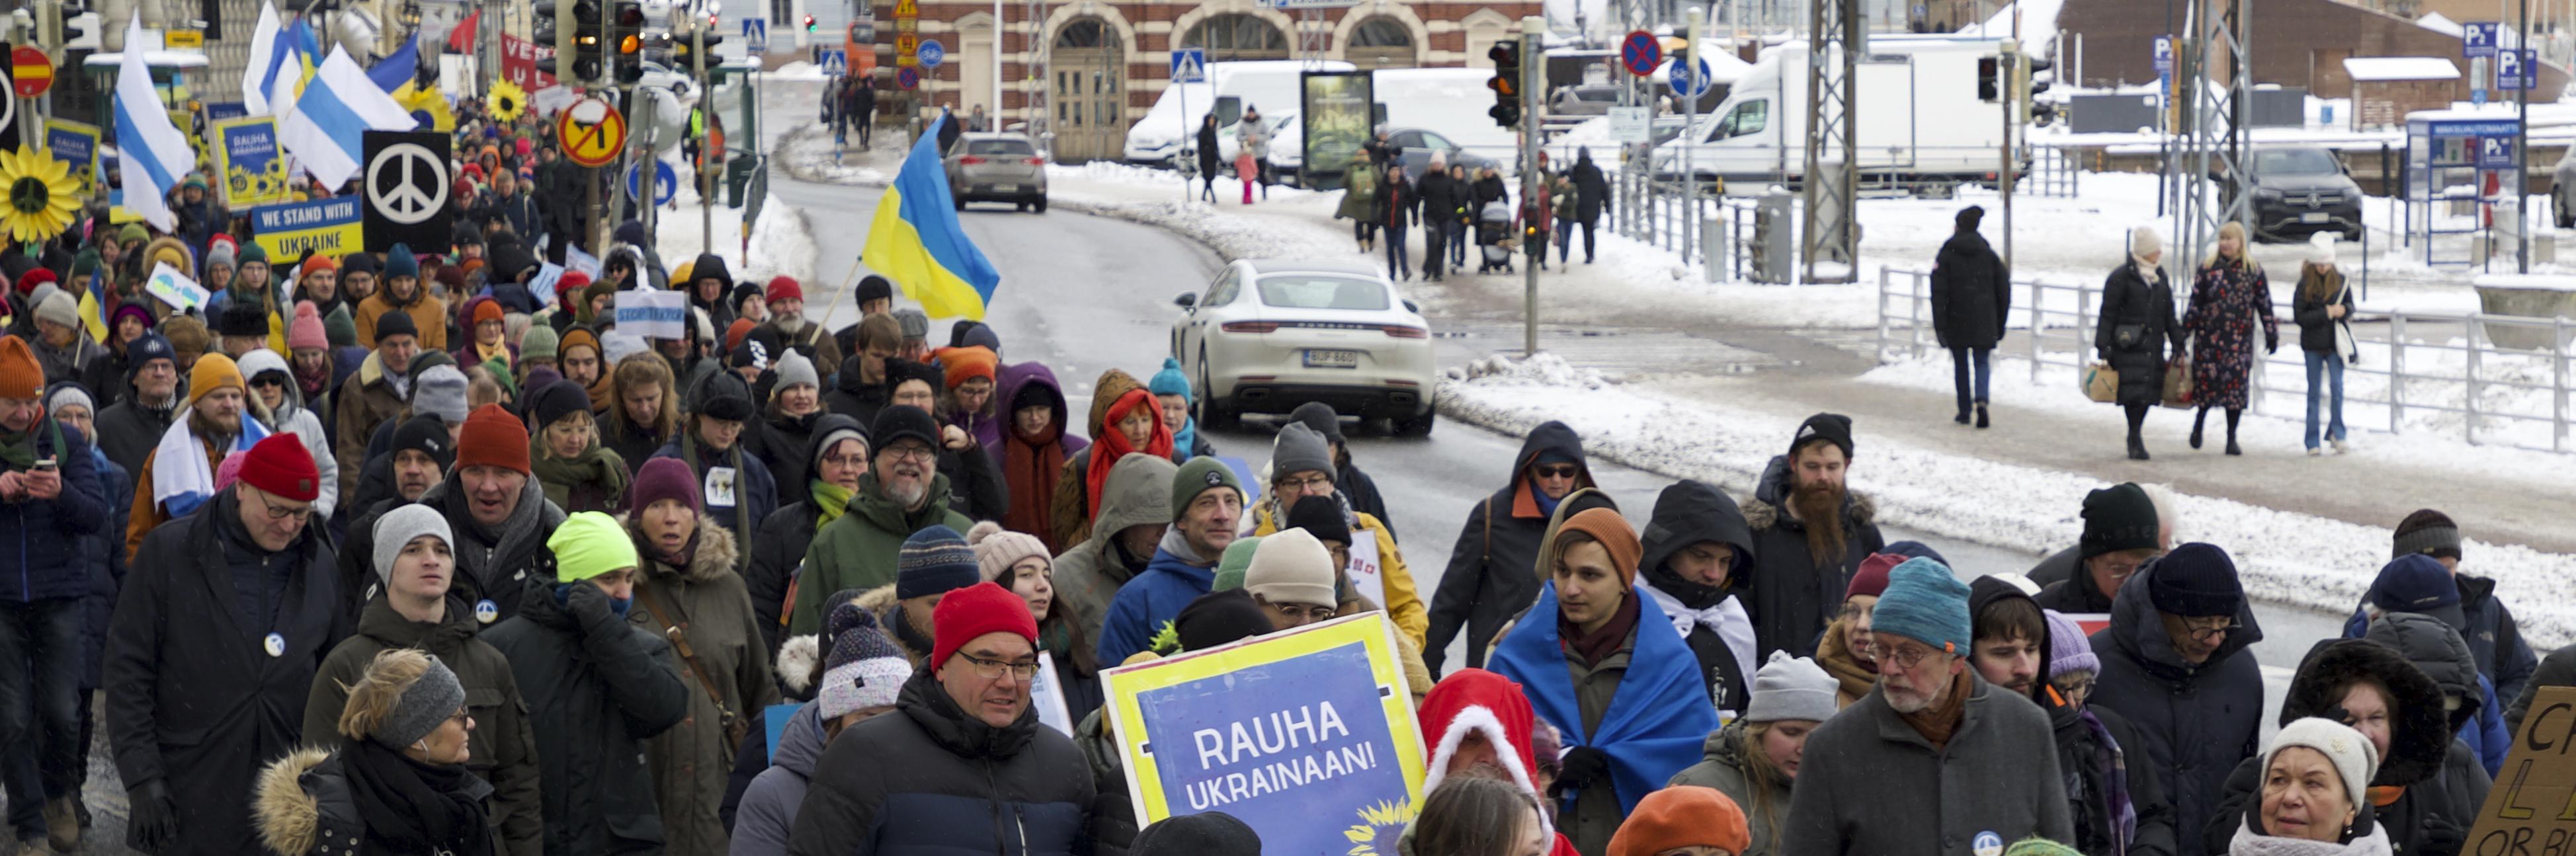 People marching in the street with banners that read "Rauha Ukrainaan!"